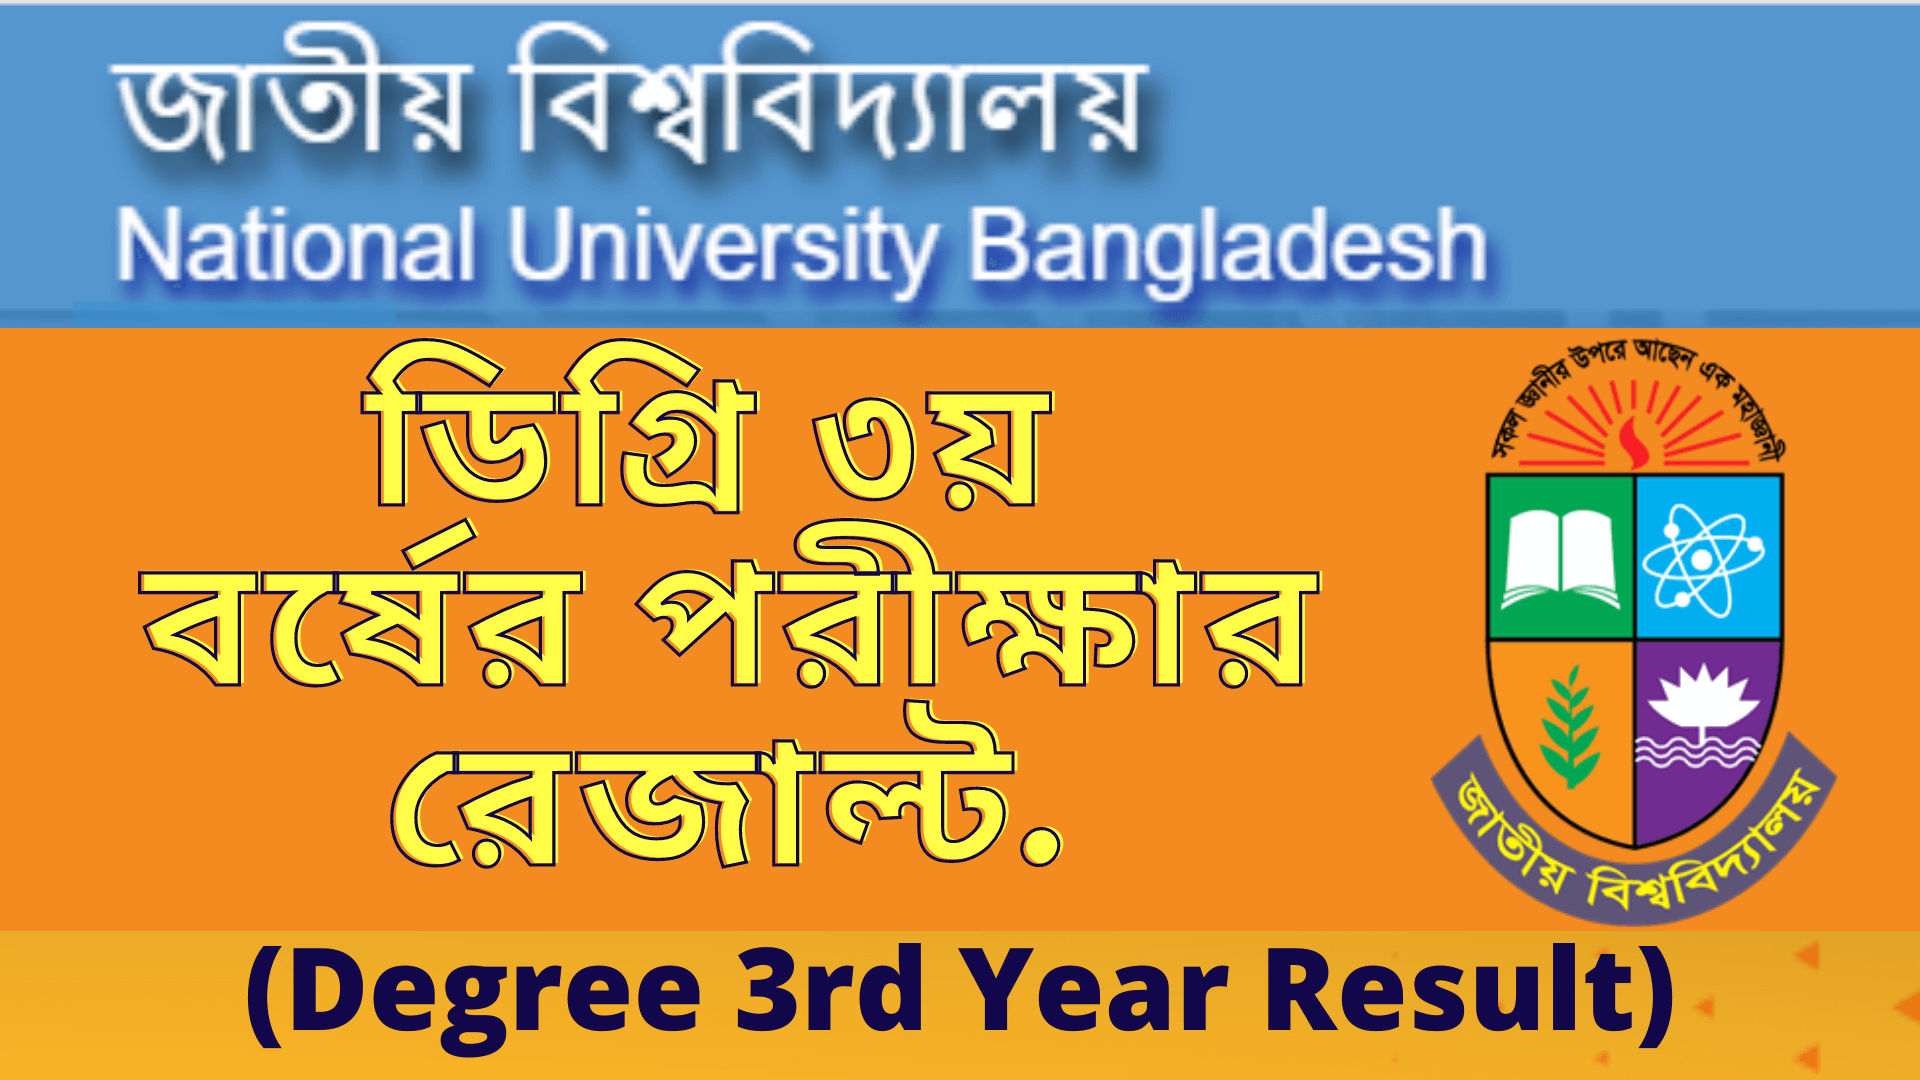 Degree 3rd Year Result